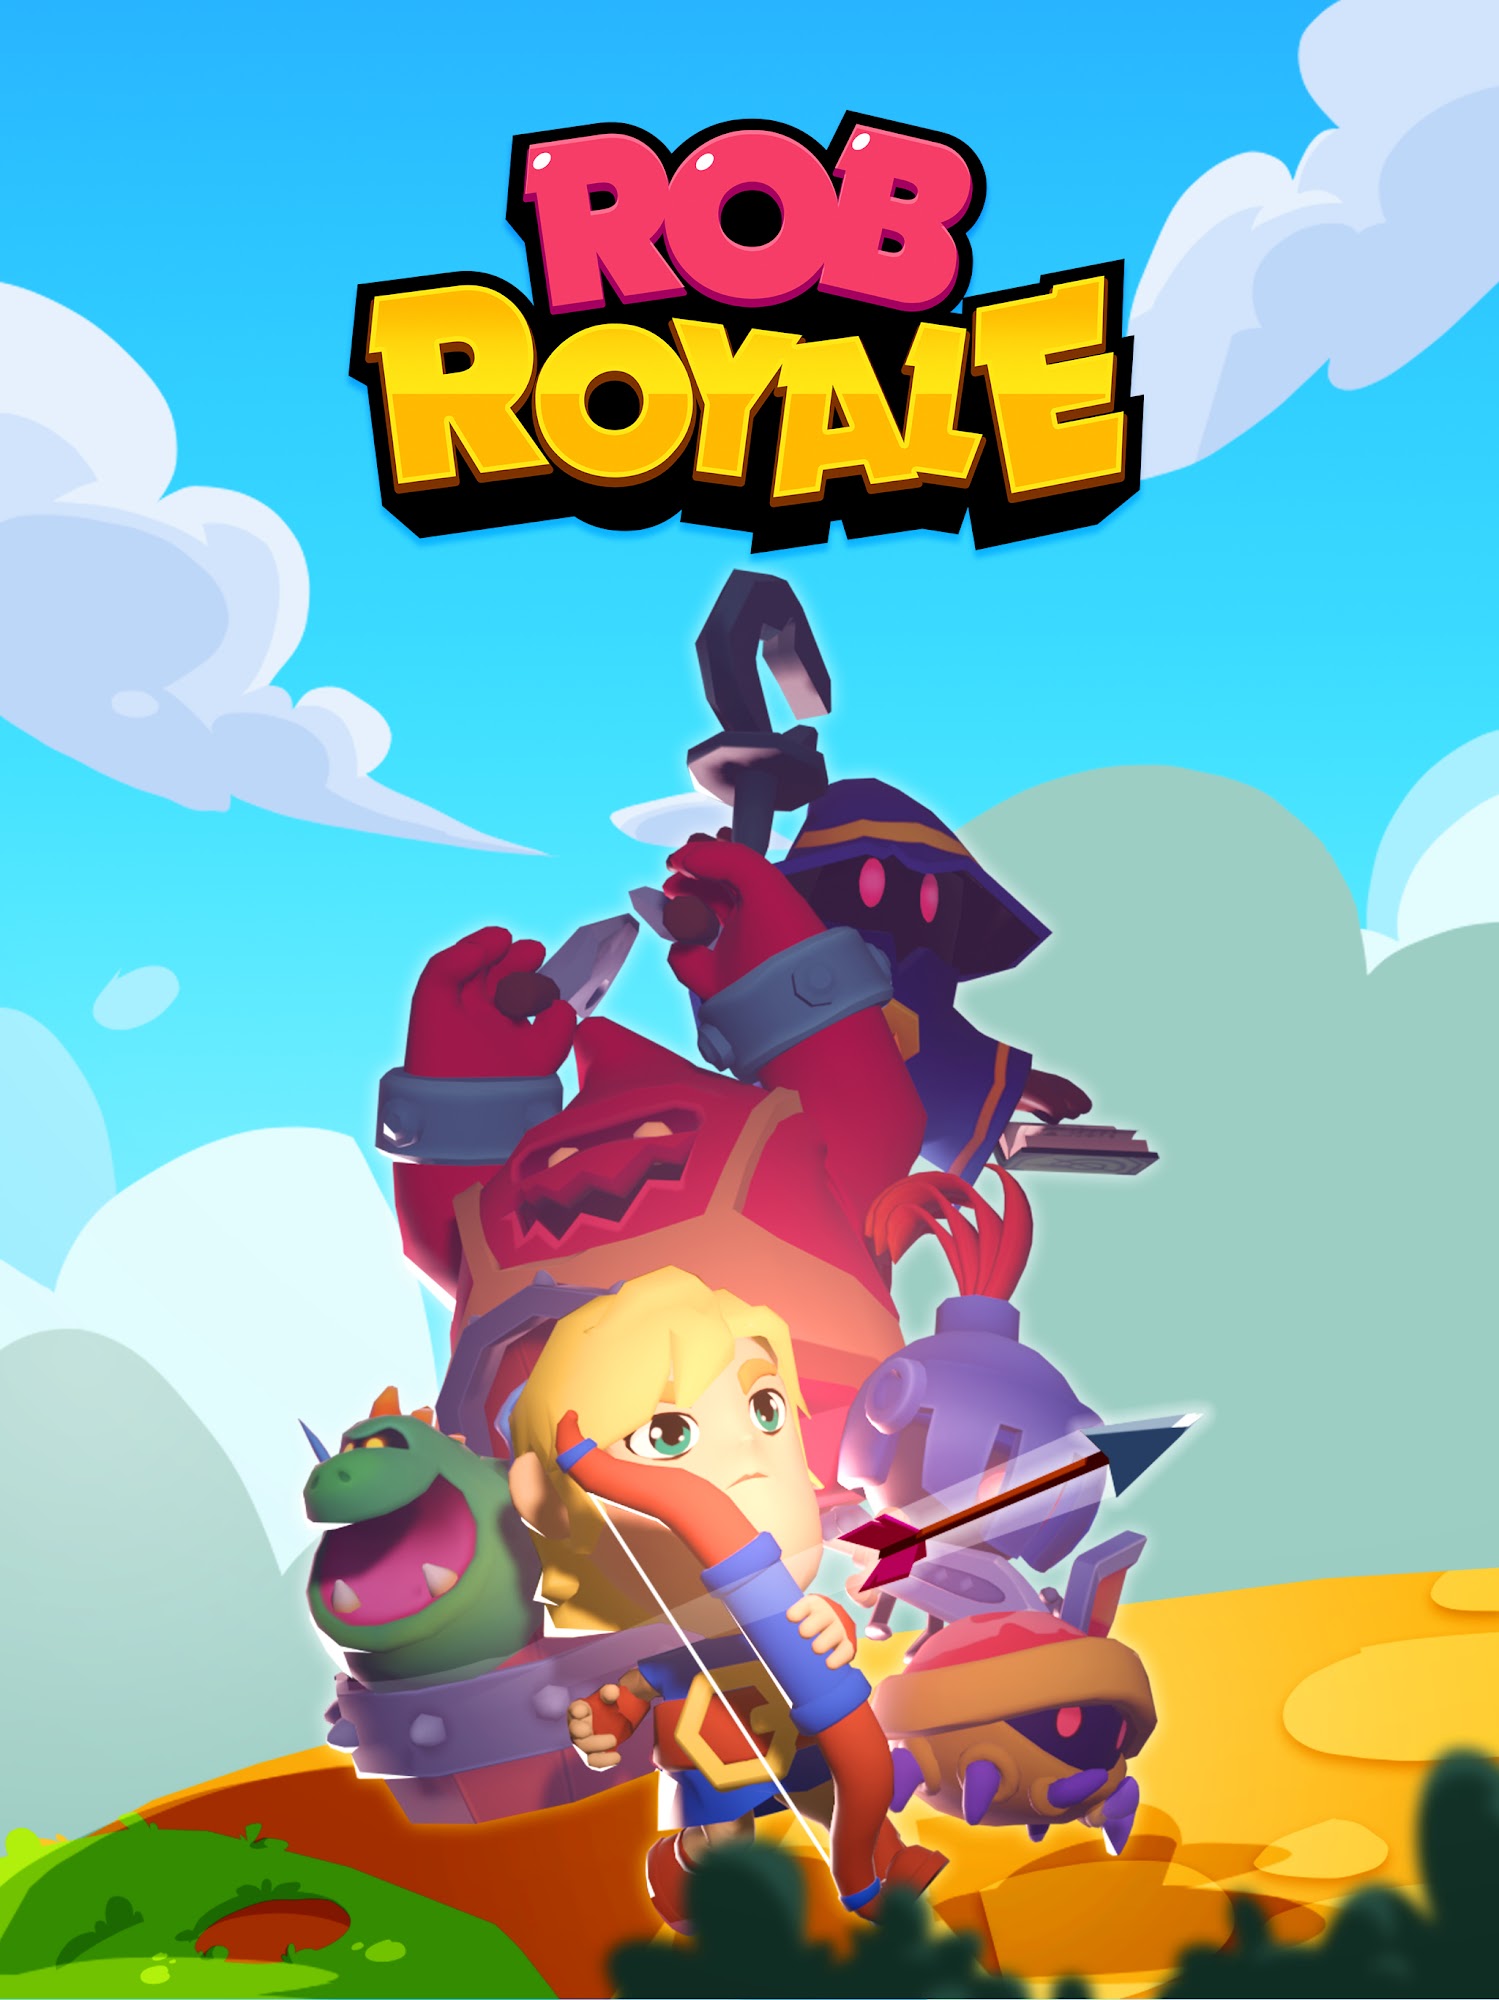 Scarica Rob Royale gratis per Android.